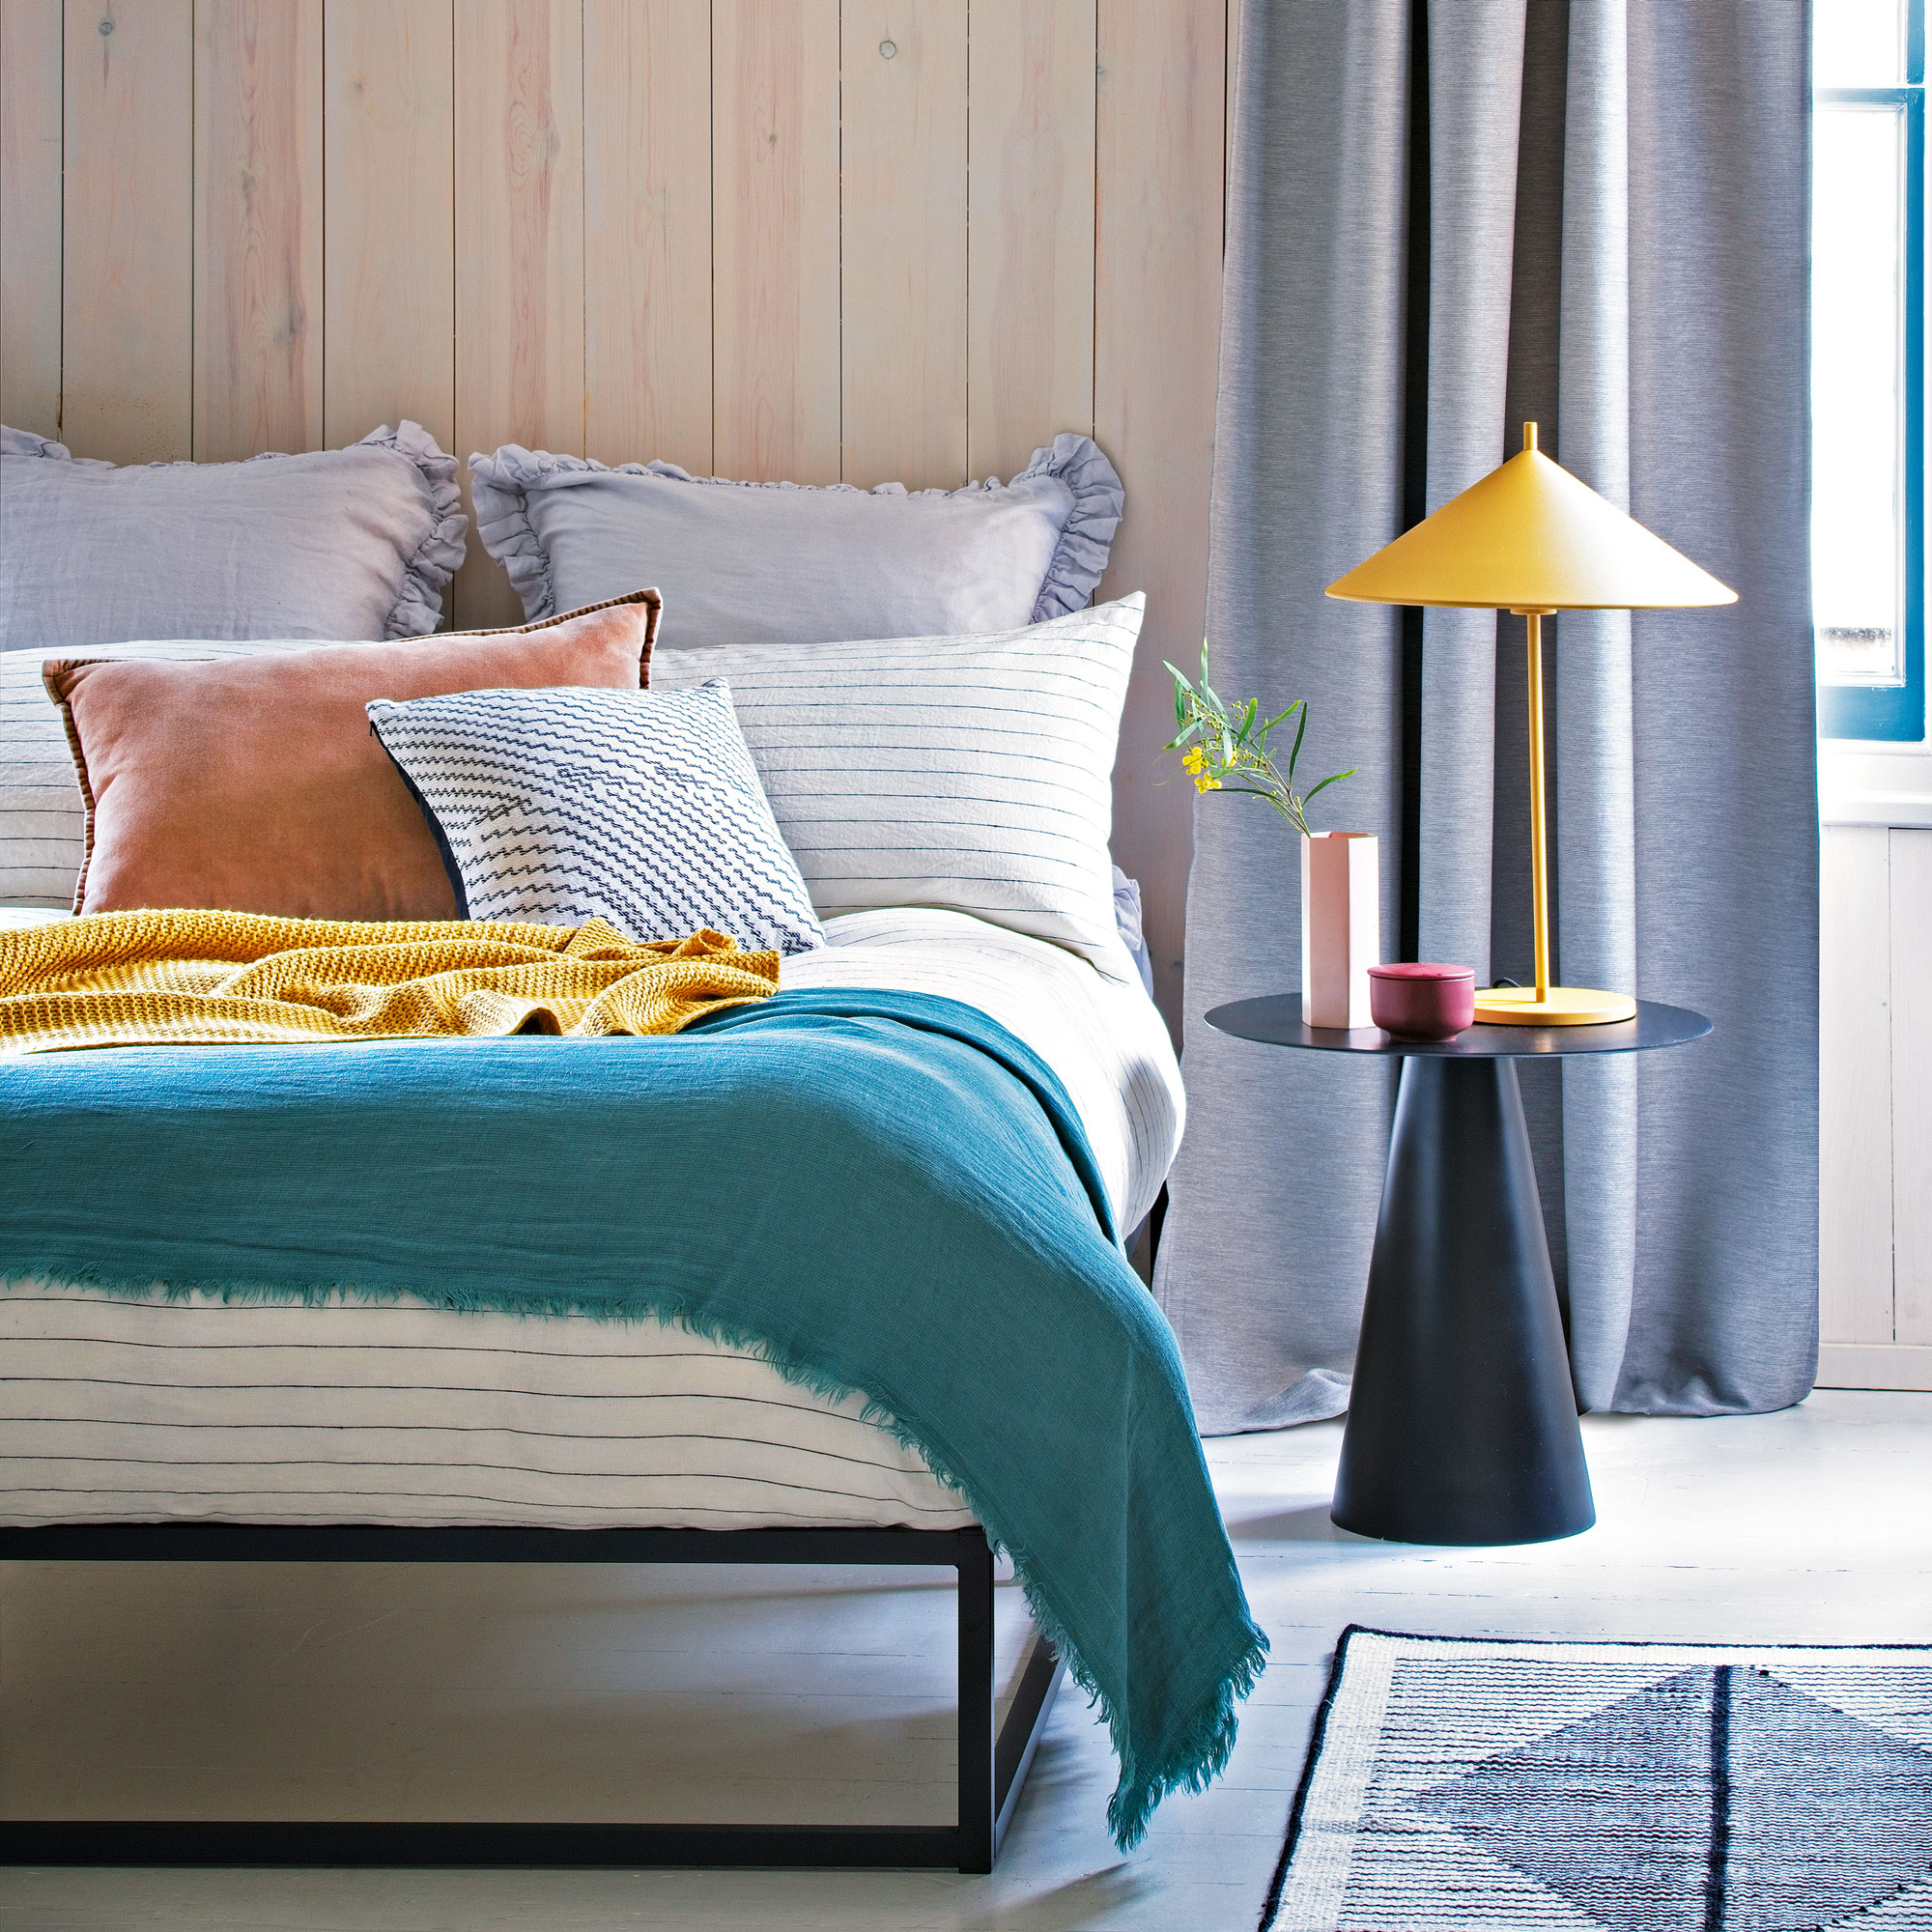 Too Hot To Sleep Keep A Bedroom Cool With These 15 Tips Ideal Home